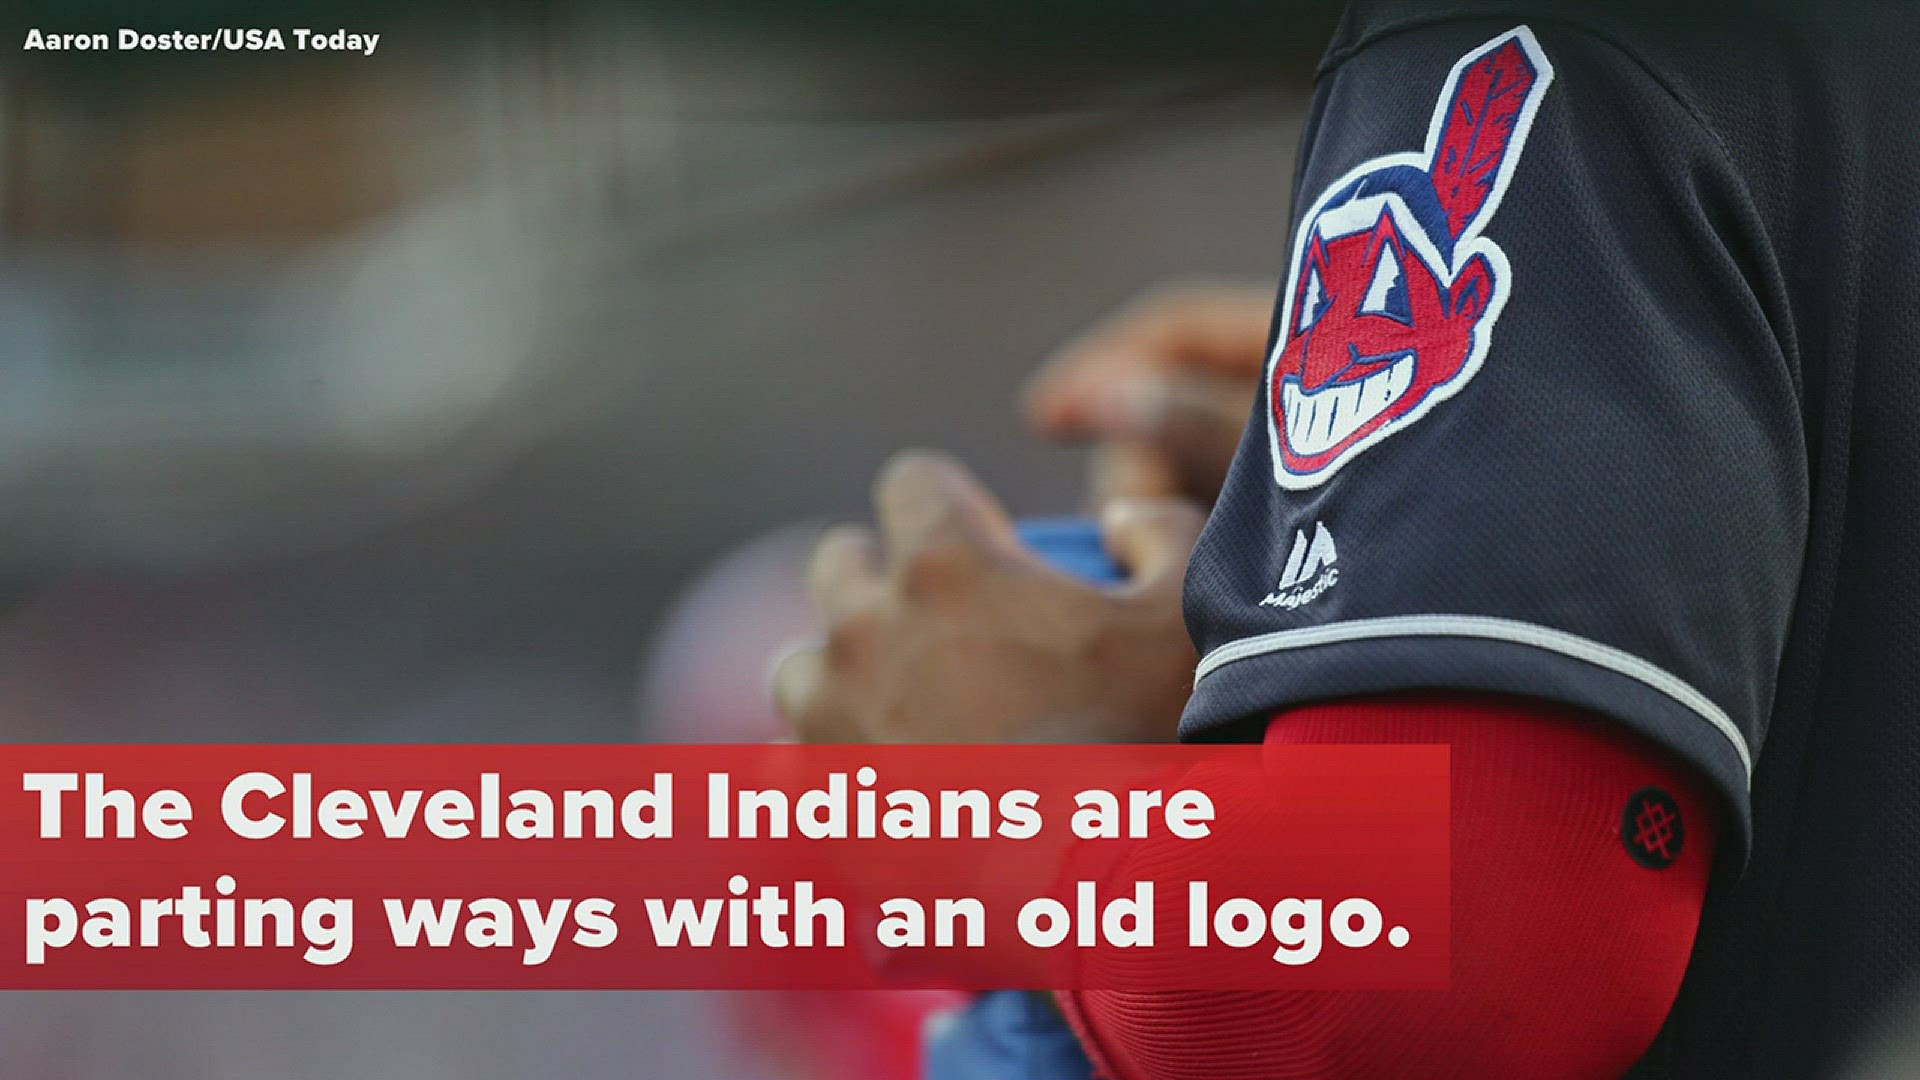 Indians removing Chief Wahoo logo from uniforms starting in 2019